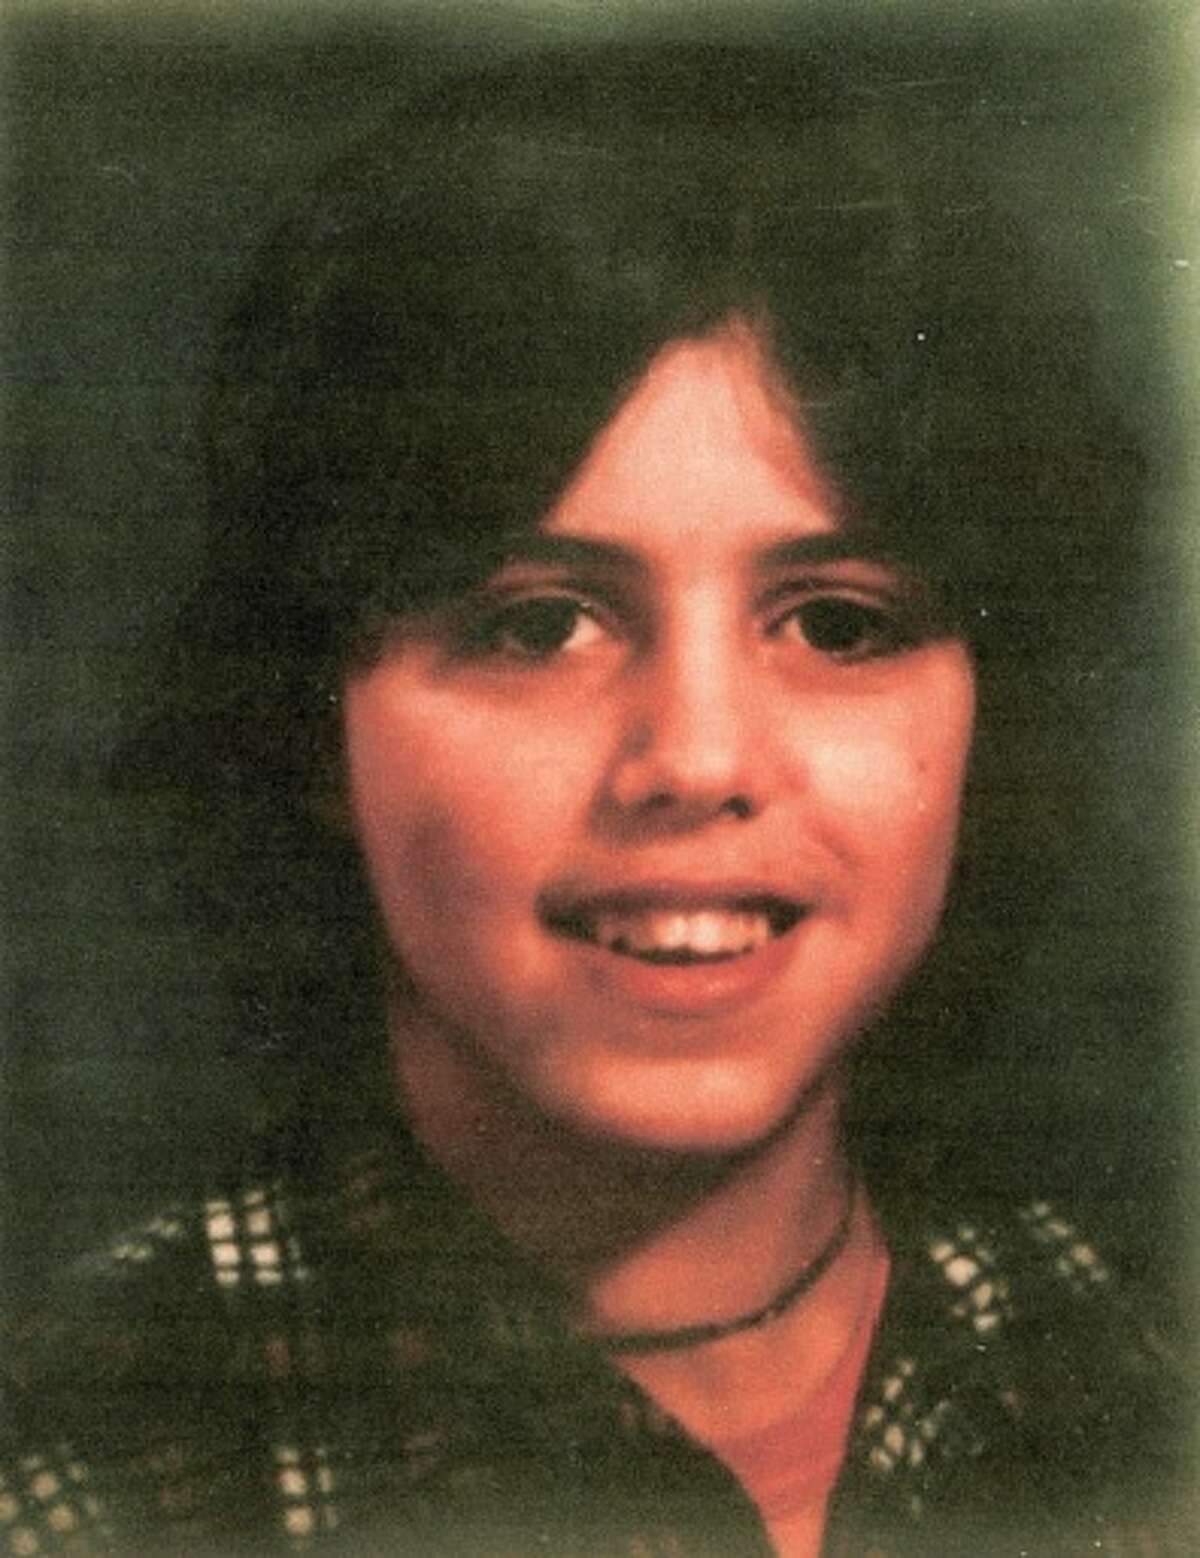 Robert "Bobby" Gutkaiss, 15, disappeared in 1983 and was later found dead. State Police said they continue to investigate his homicide. (State Police)